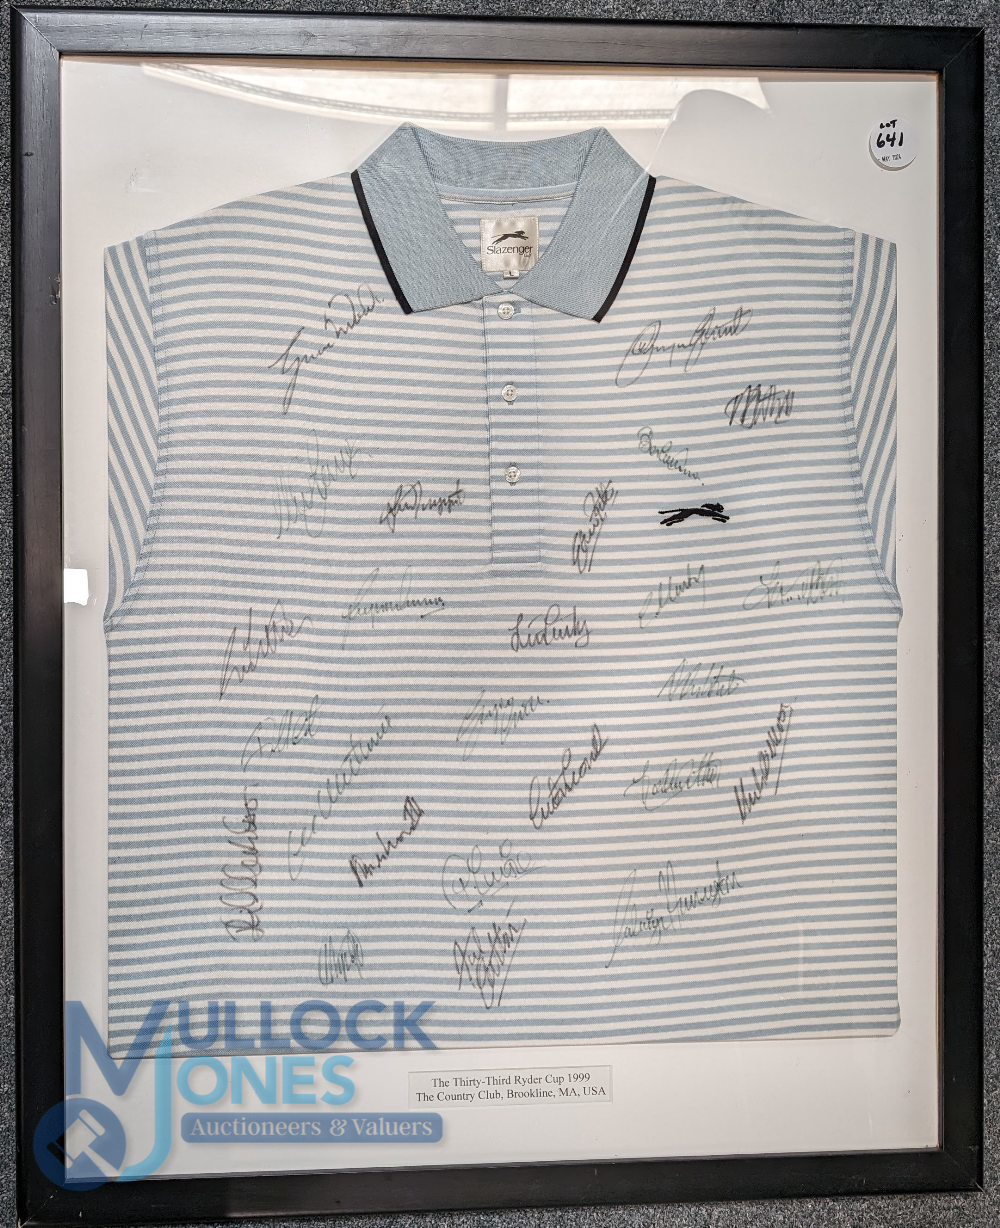 Golf Autographs - multi-signed 1999 Ryder Cup Golf framed T-Shirt - featuring the European and